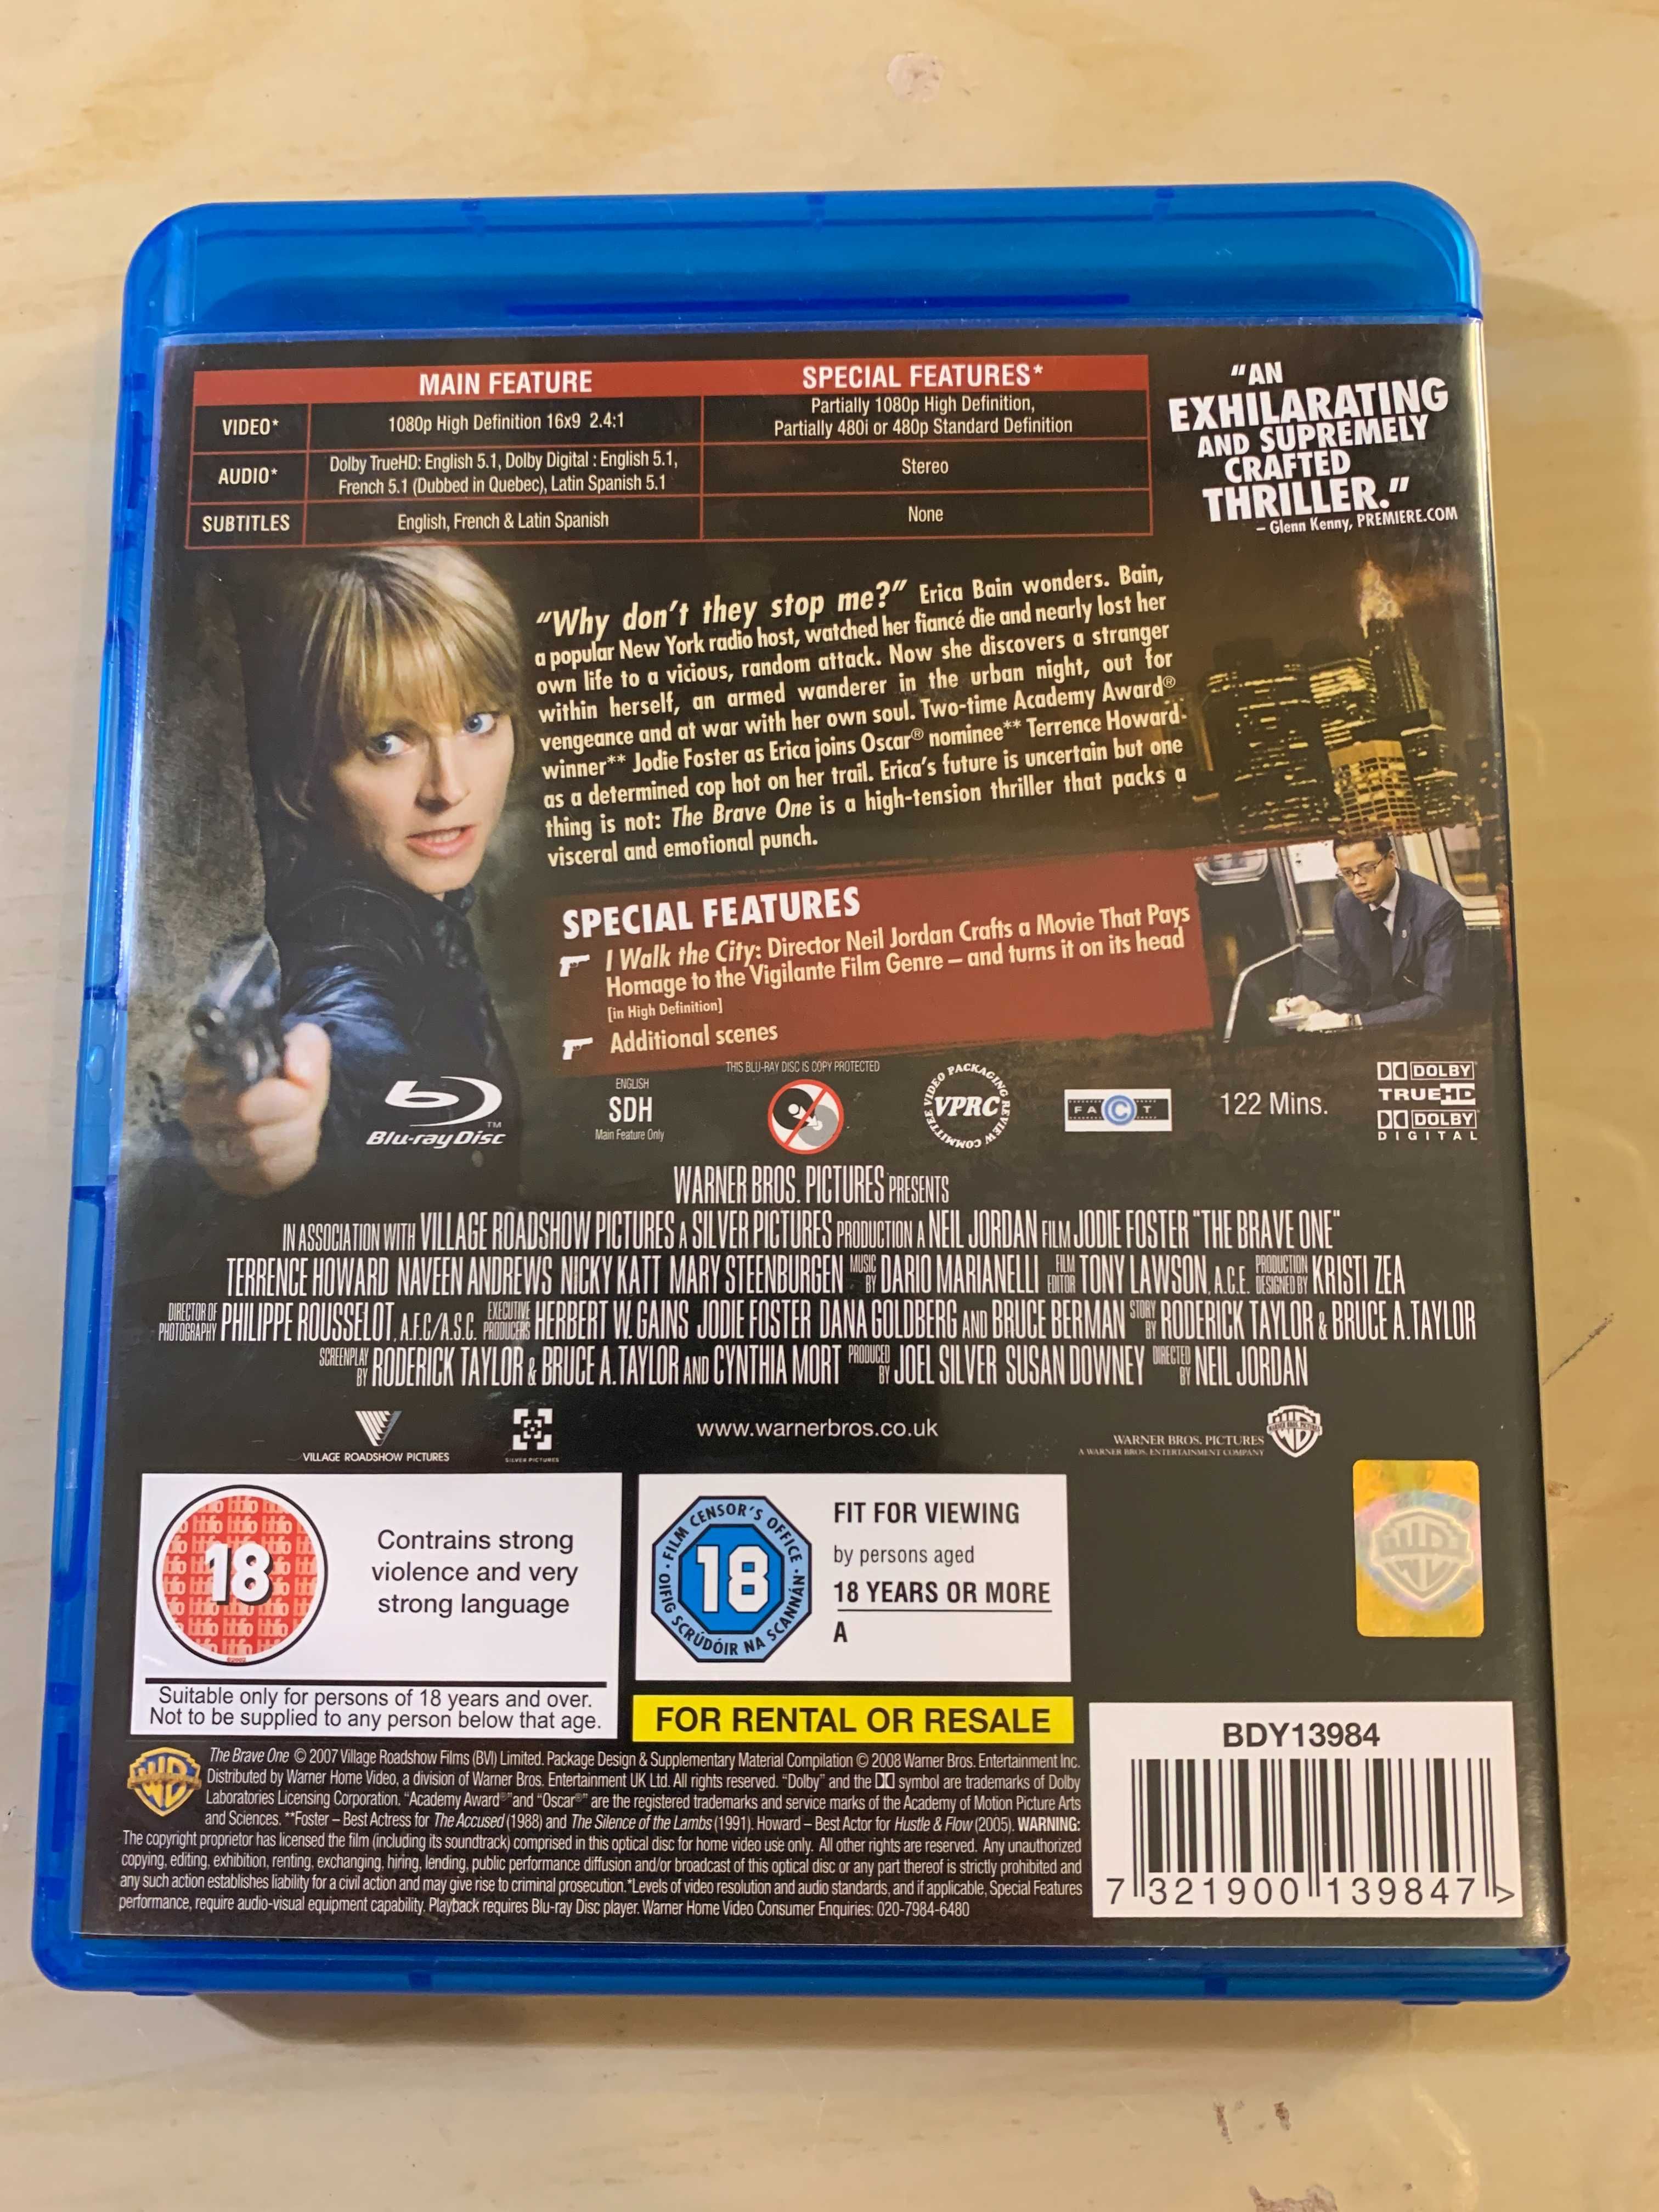 The Brave One - Blu-ray